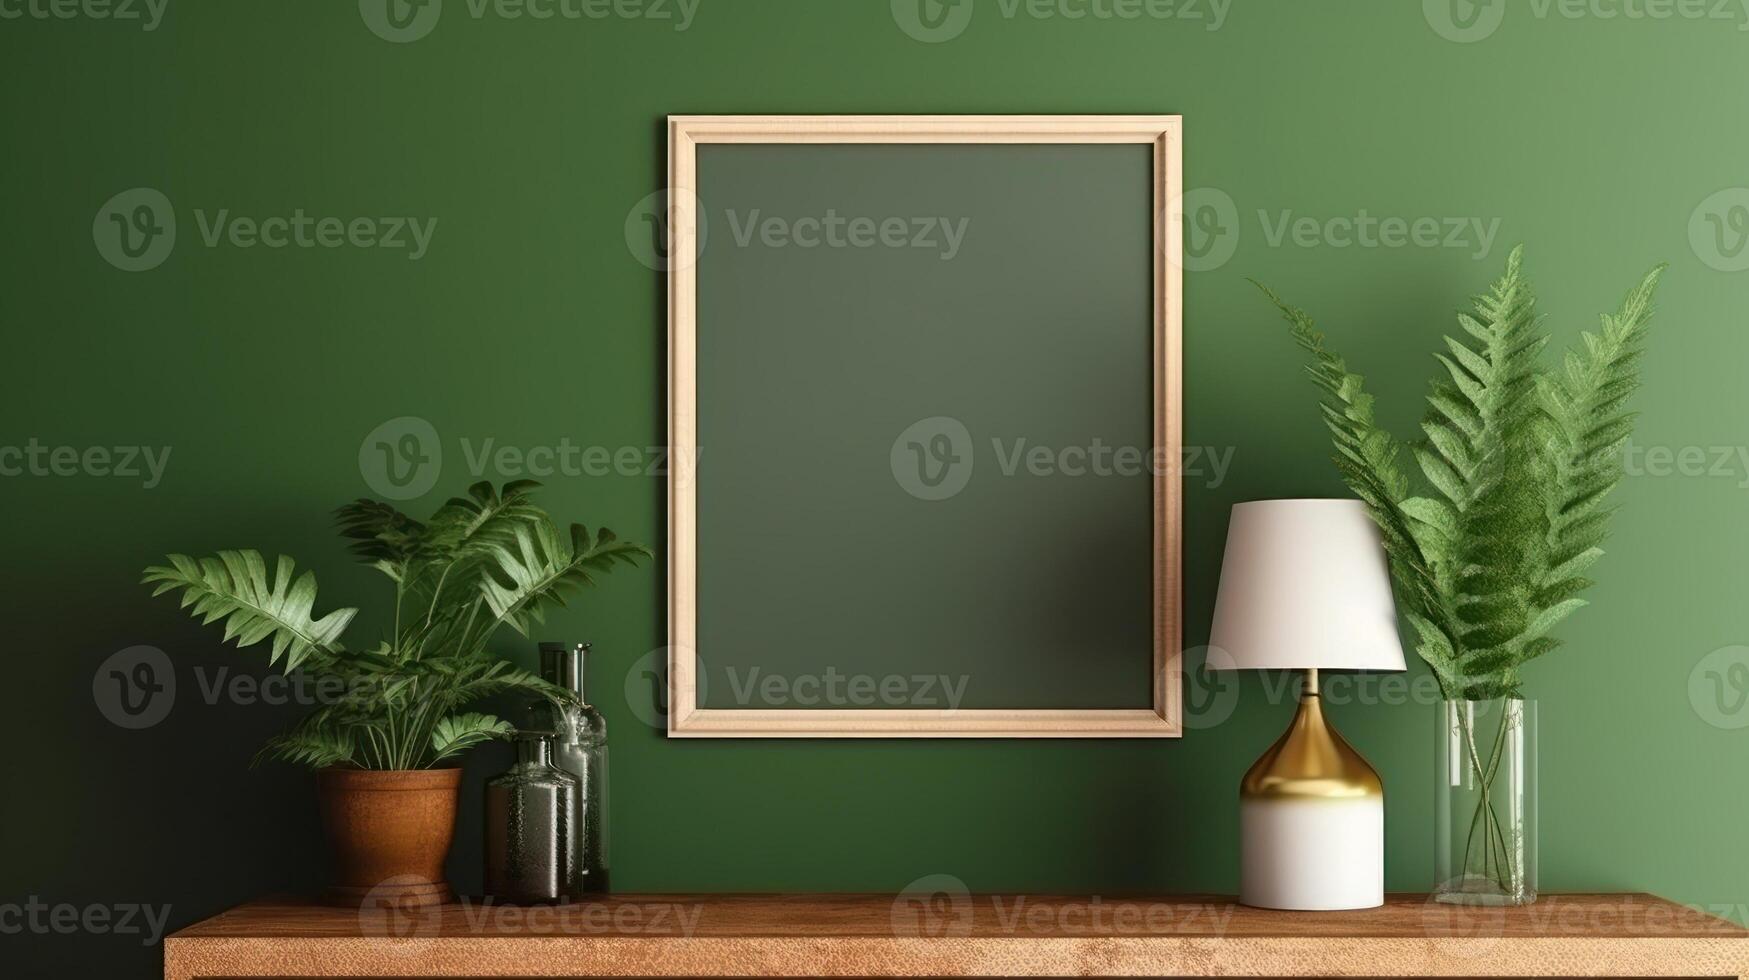 Wooden photo frame mockup green wall mounted on the wooden cabinet, interior decorated with plant leaf, lamp and vase.